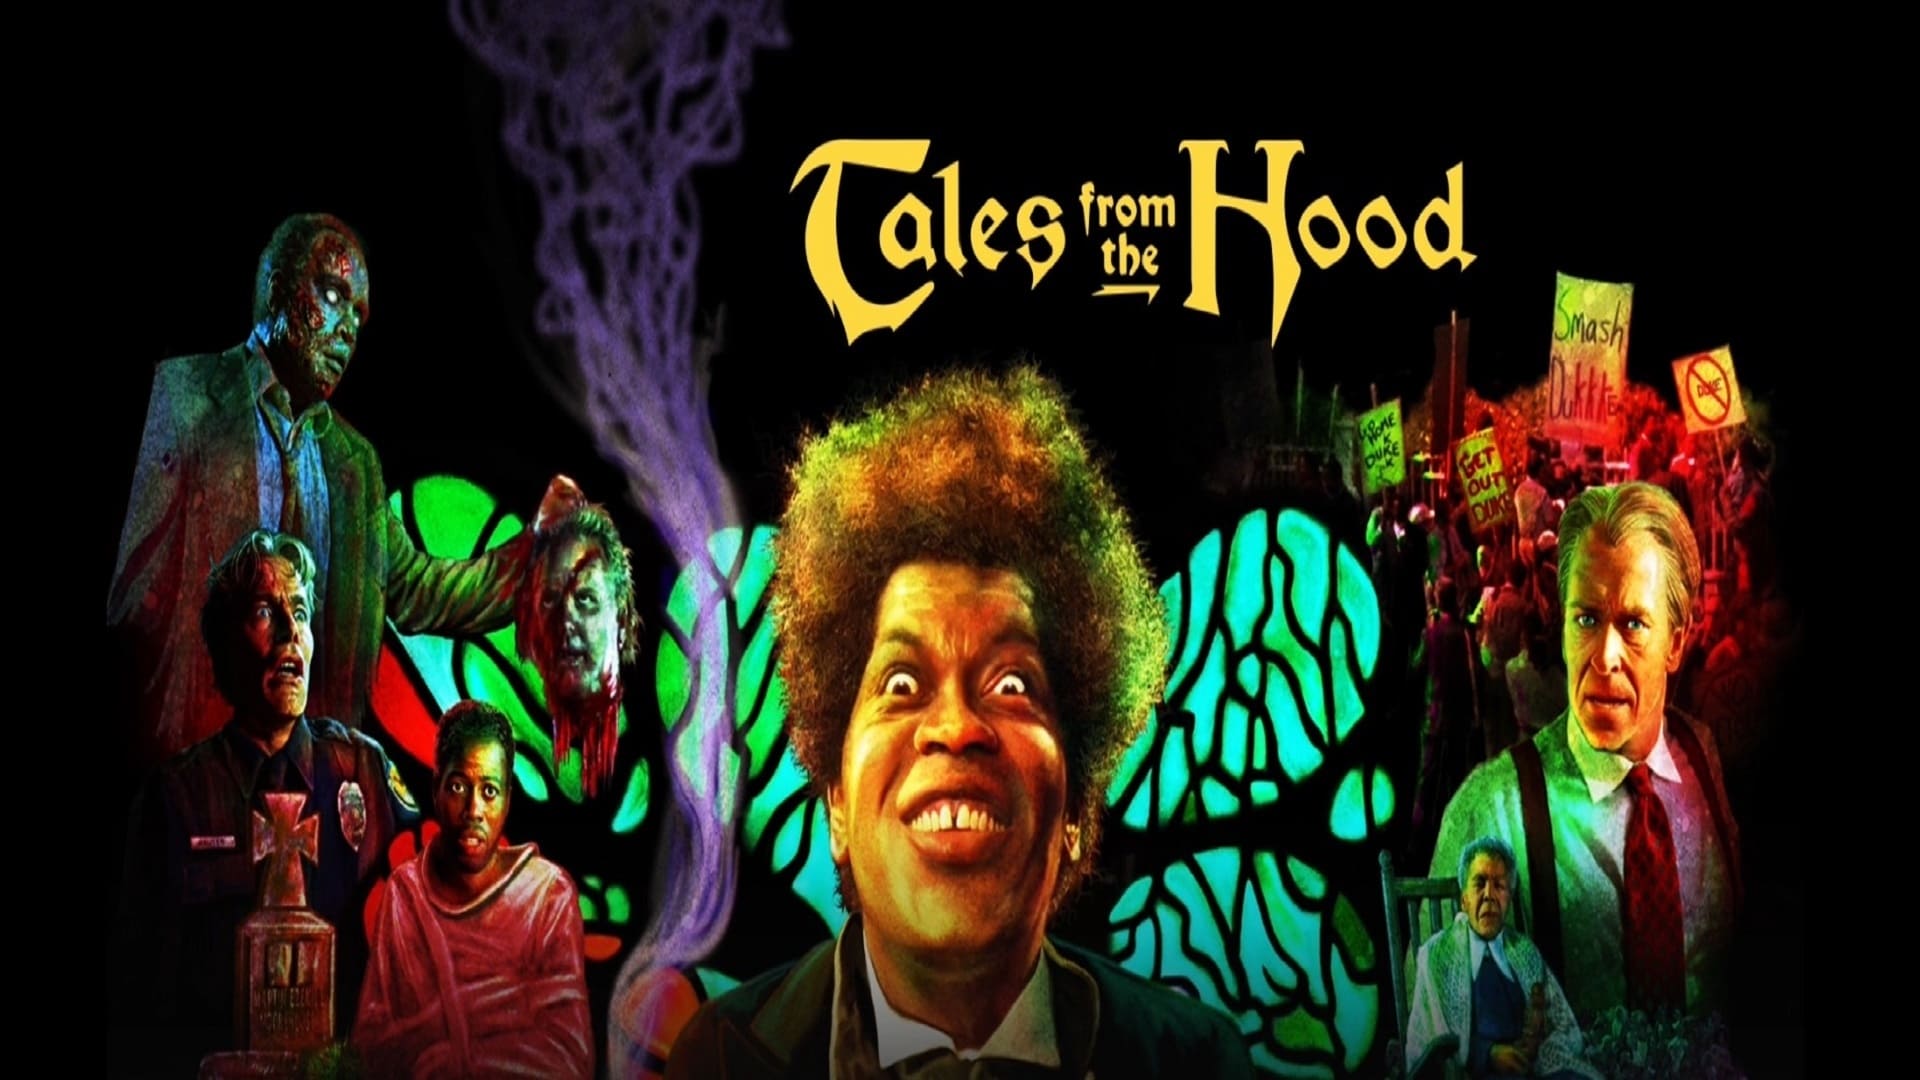 Tales from the Hood (1995)